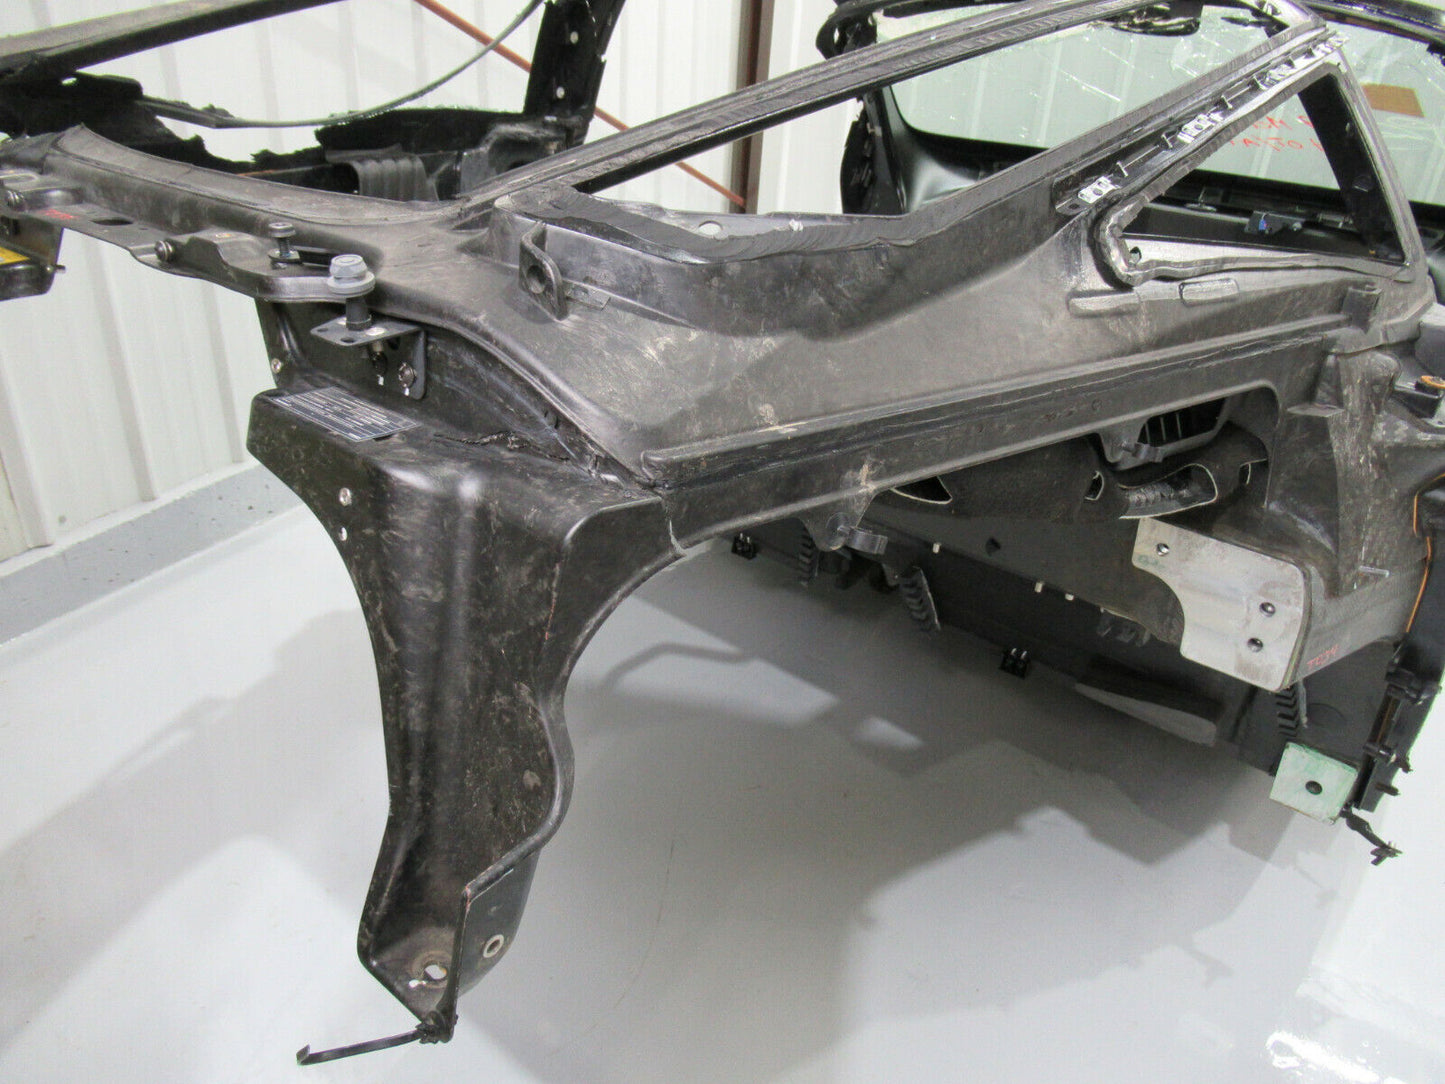 T034 2019 19 MCLAREN 720S CHASSIS COCK PIT FRAME SHELL BODY DAMAGED